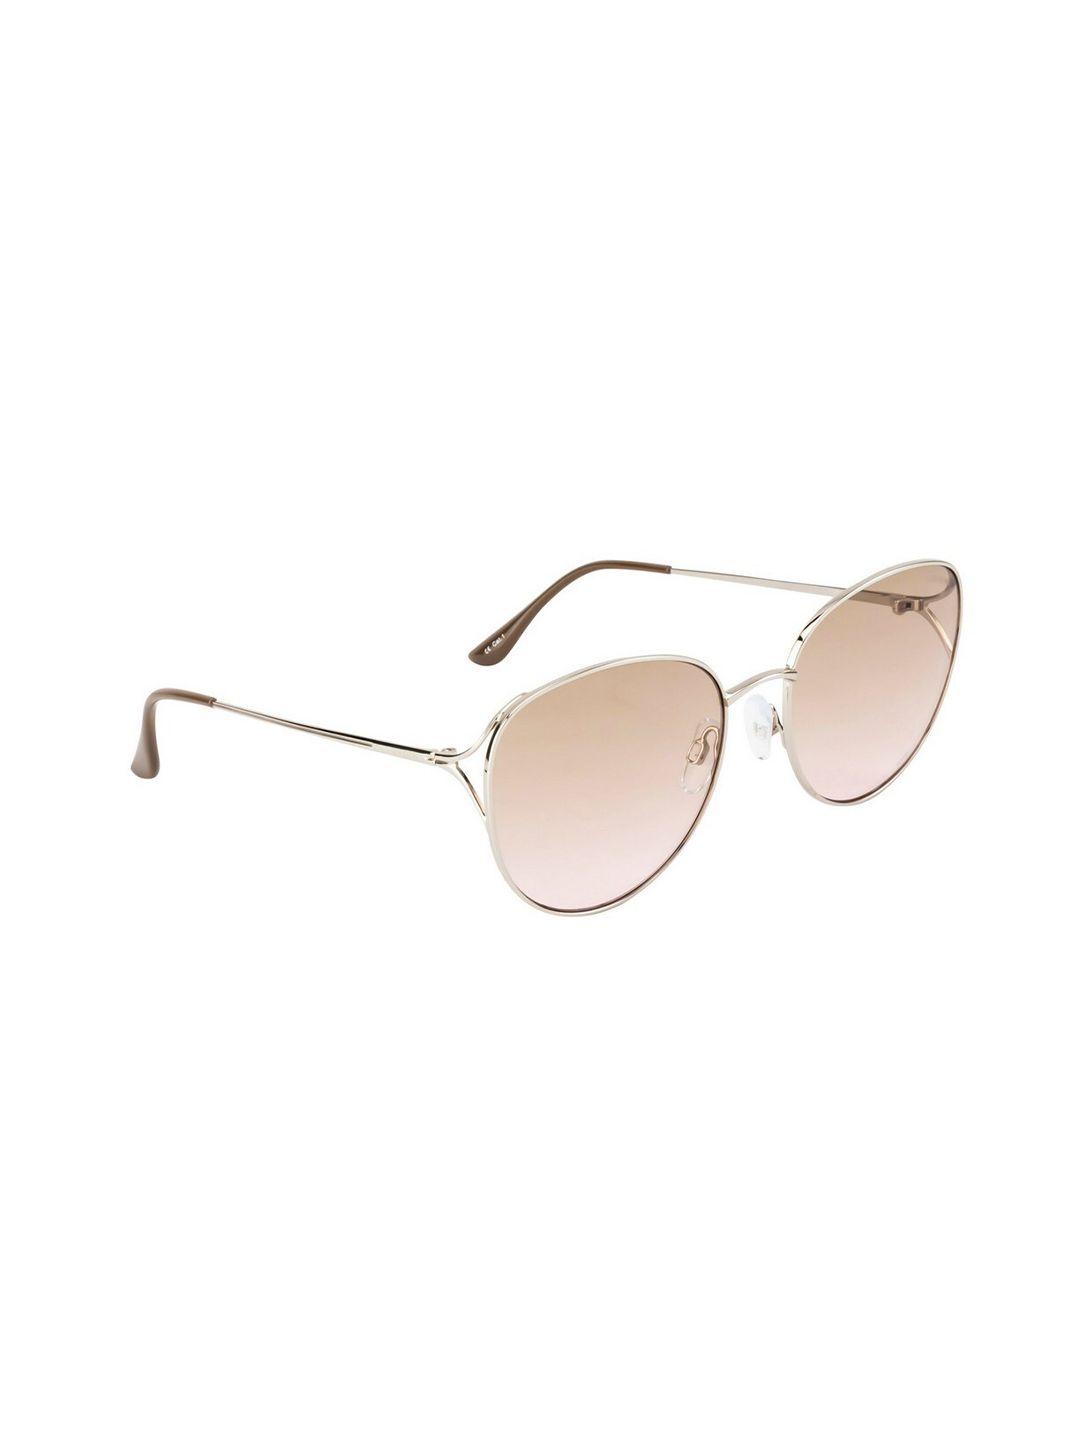 opium-women-brown-lens-&-silver-toned-round-sunglasses-with-uv-protected-lens-op-1953-c04